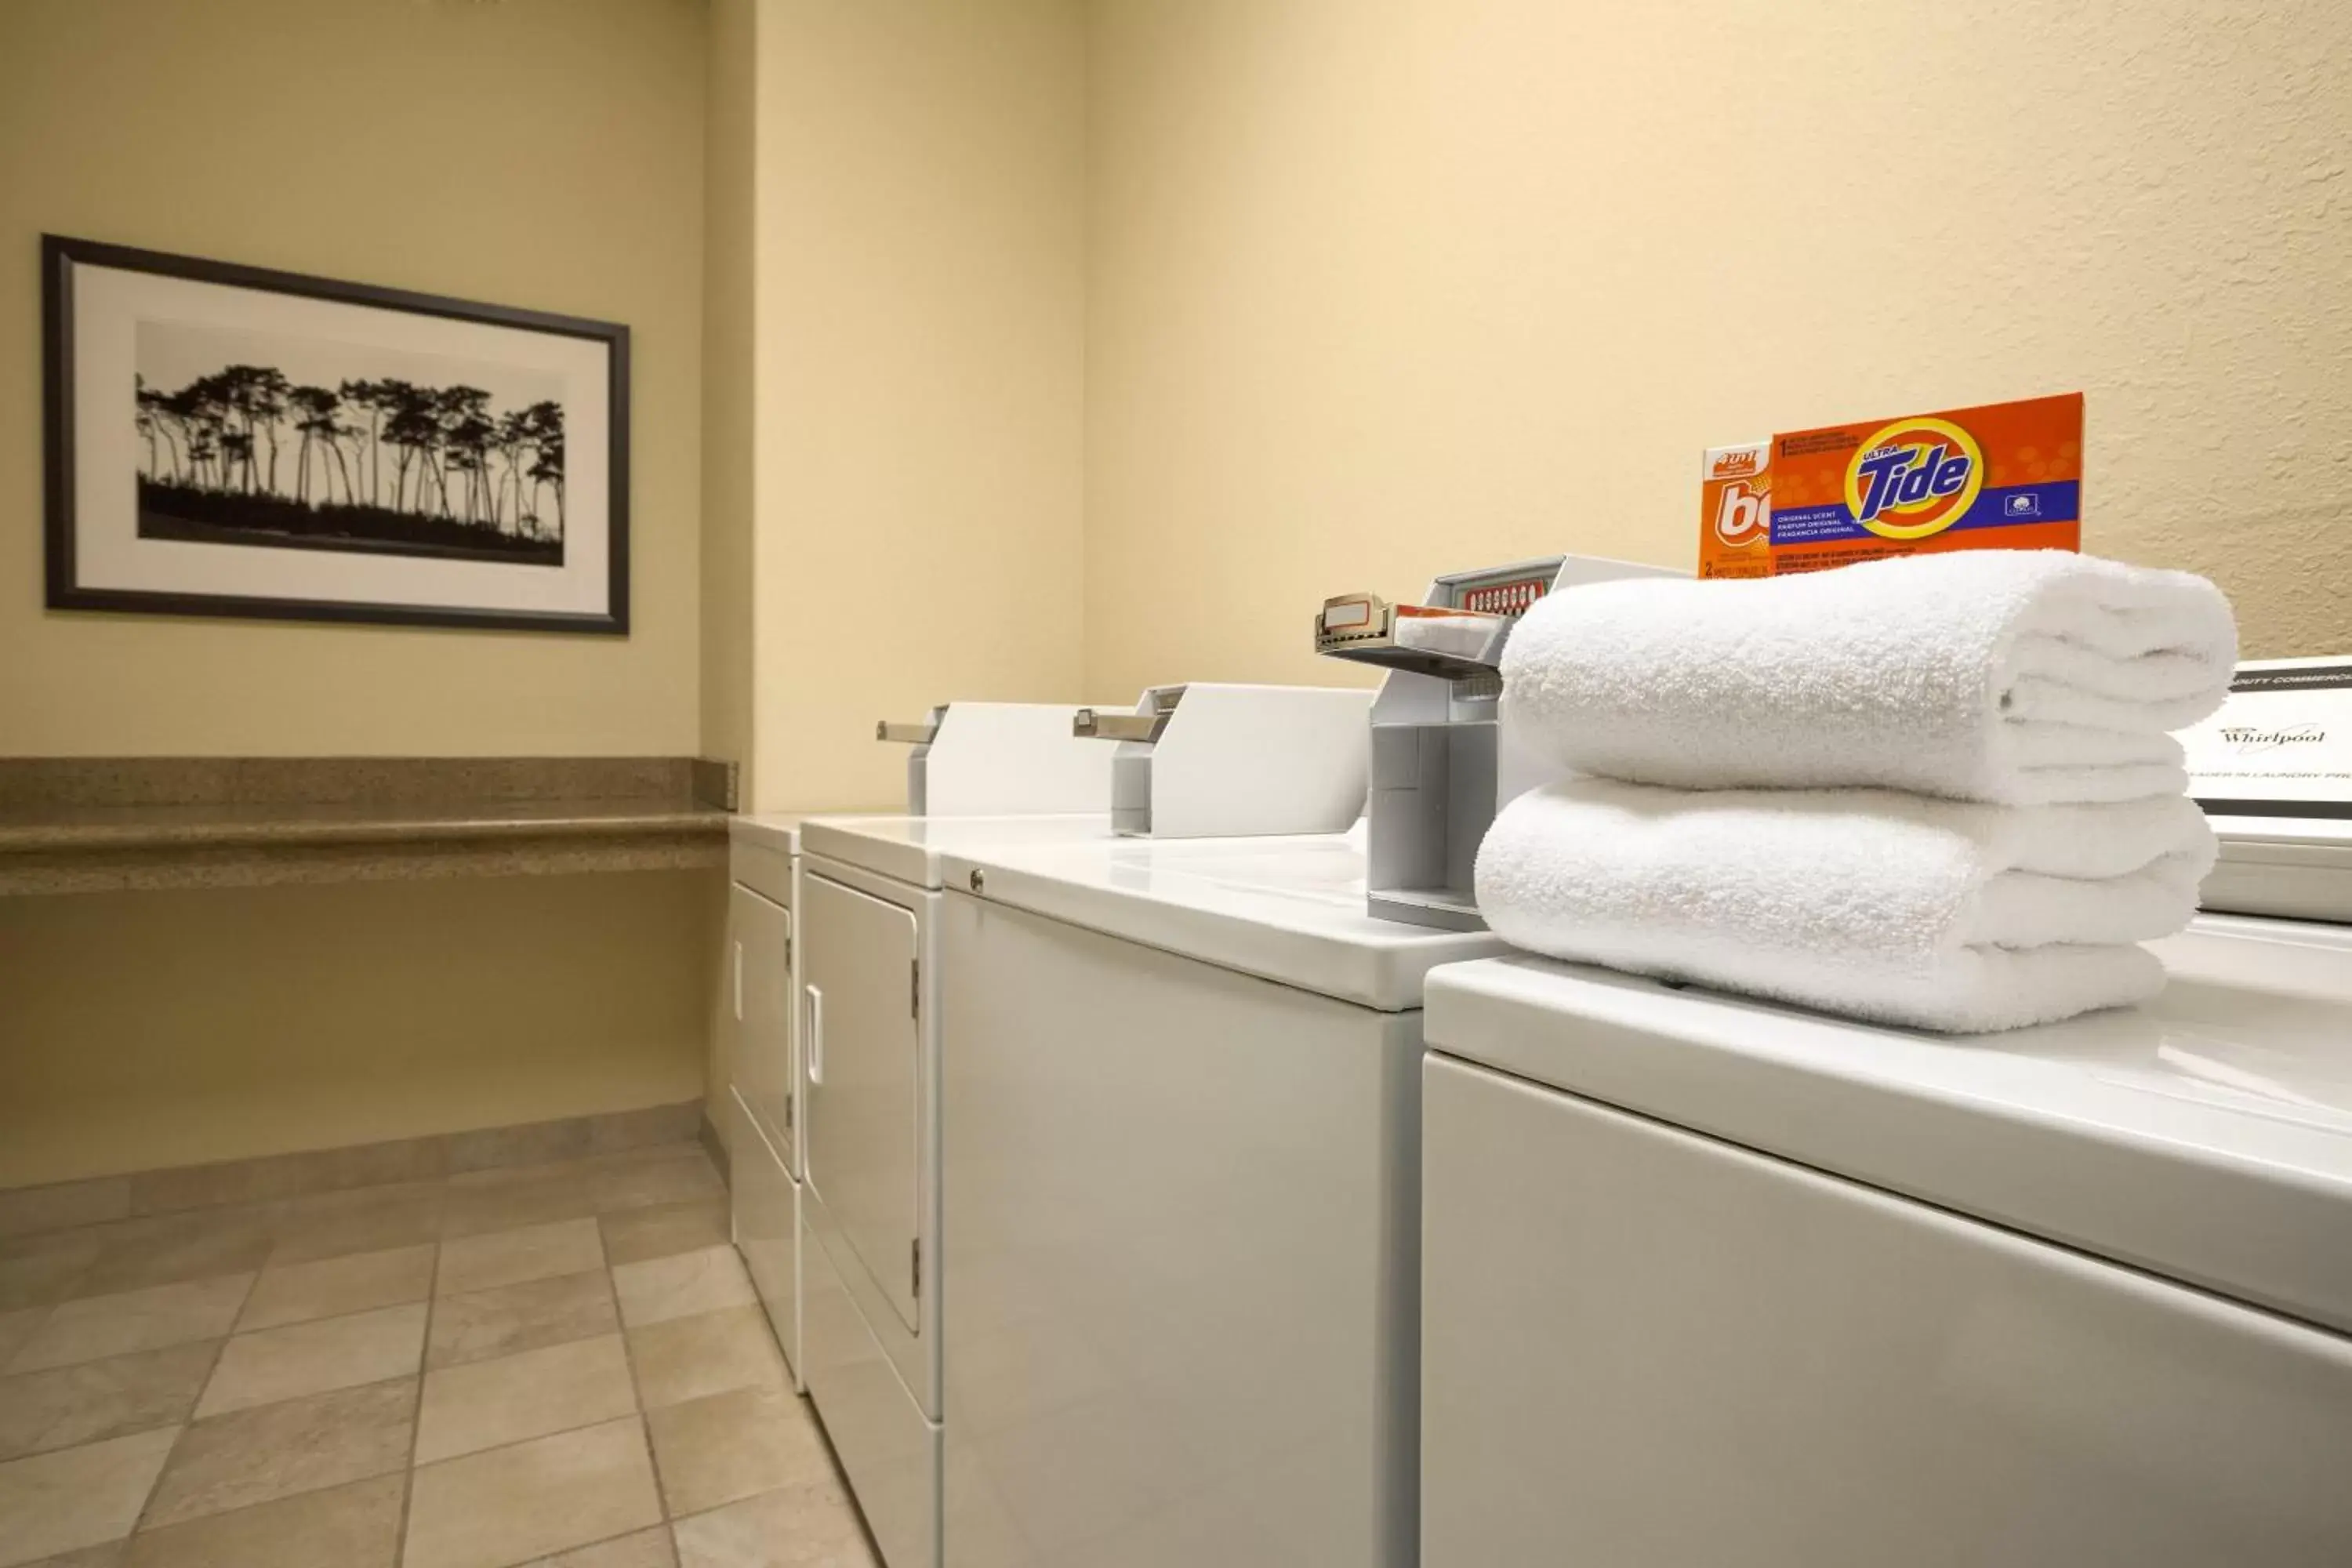 Area and facilities in Country Inn & Suites by Radisson, Pensacola West, FL